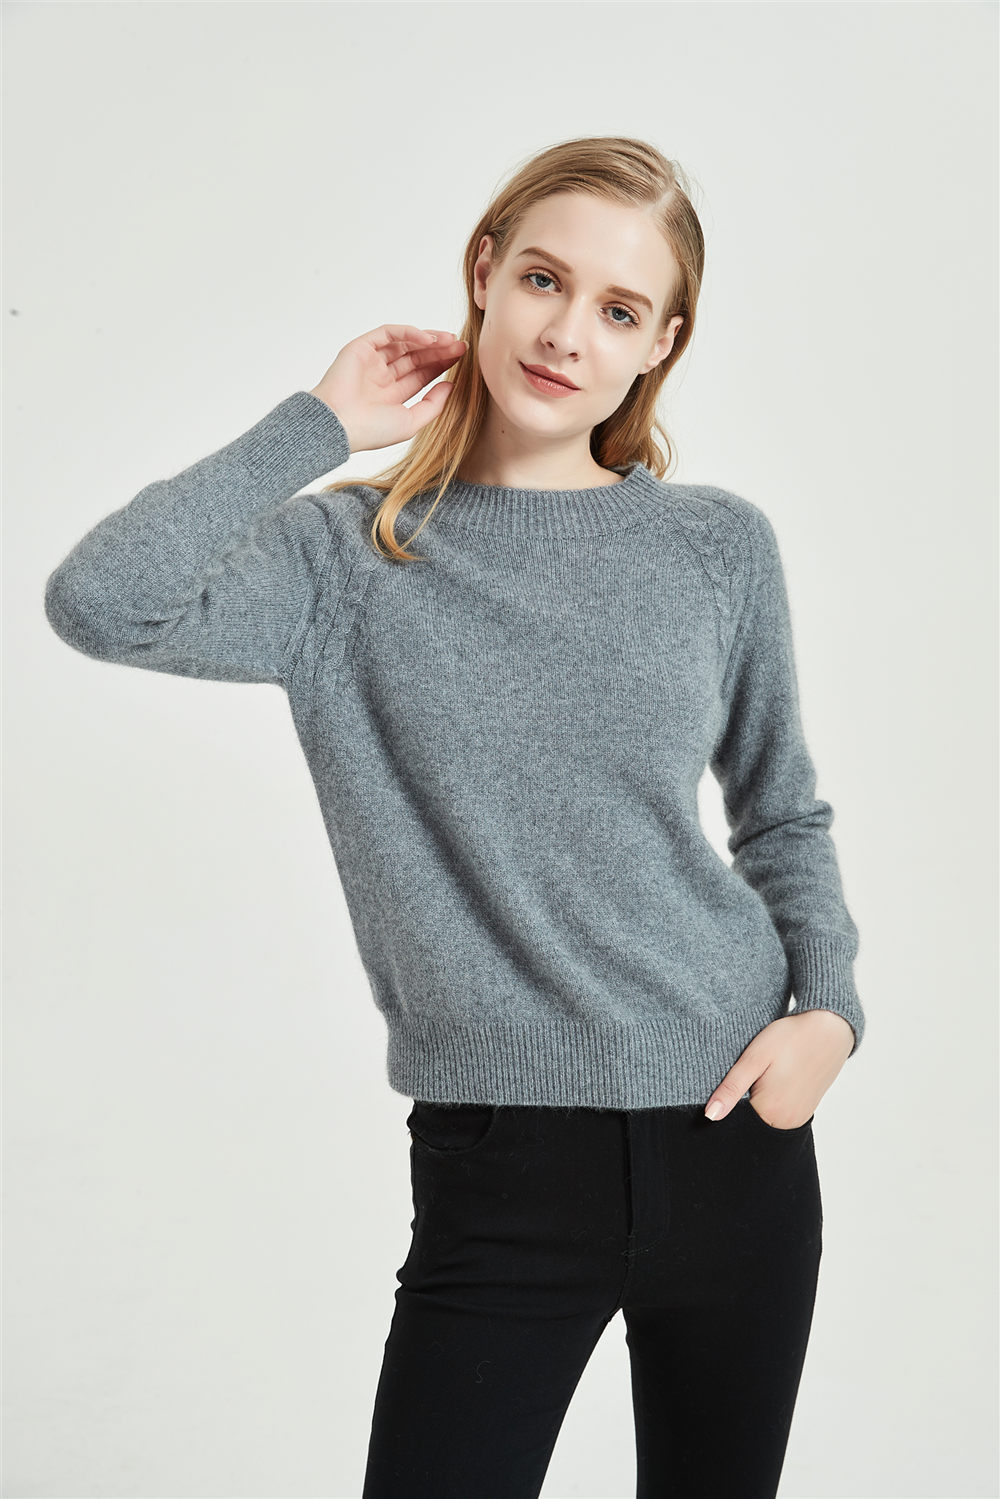 wholesale high quality cashmere sweater with seamless tech in low price ...